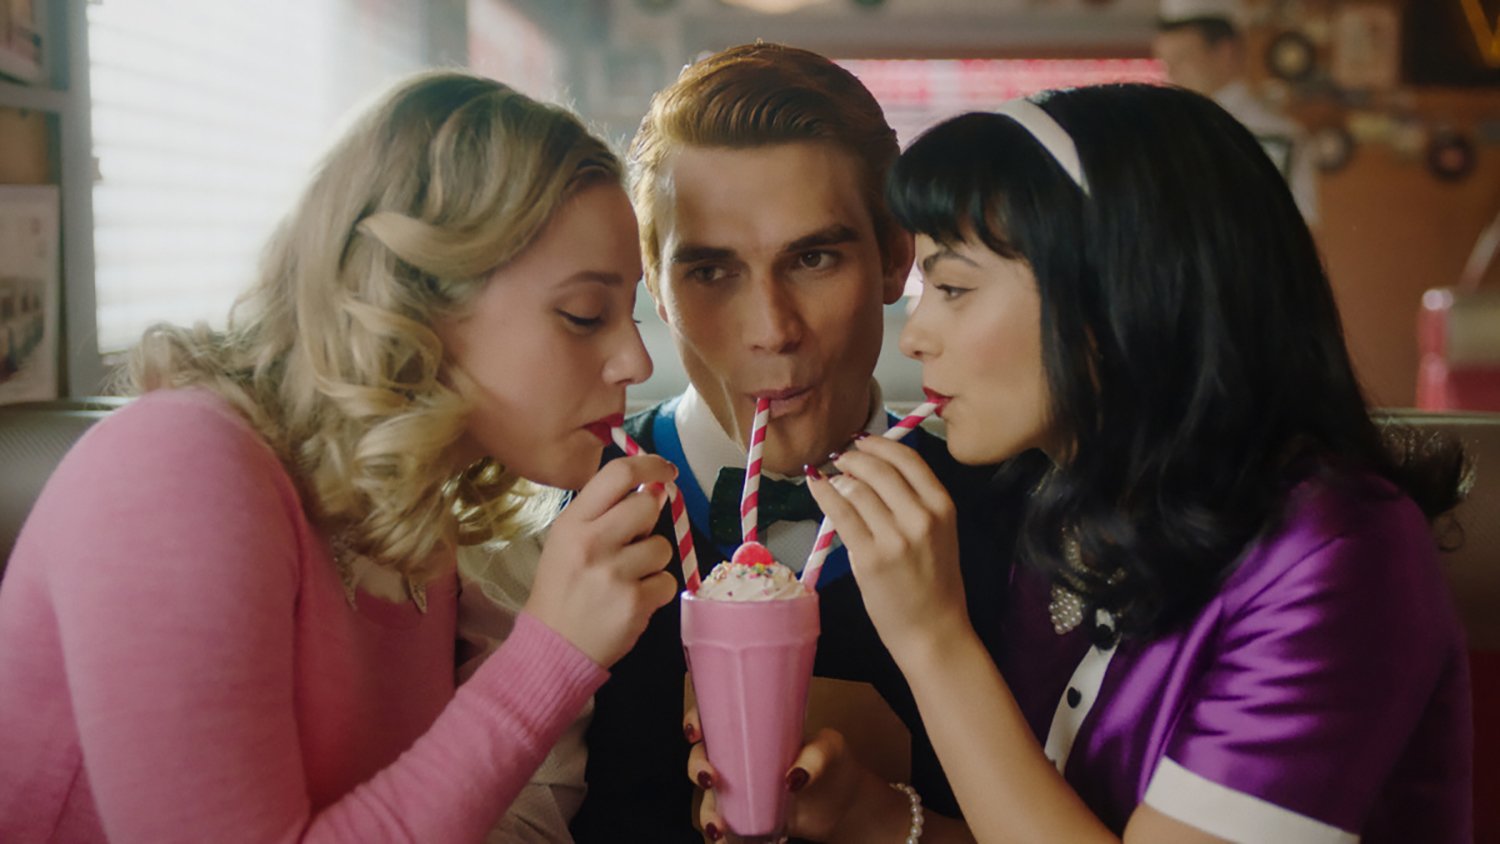 Lili Reinhart as Betty Cooper, KJ Apa as Archie Andrews, and Camila Mendes as Veronica Lodge sip from a milkshake during the 100th episode of Riverdale